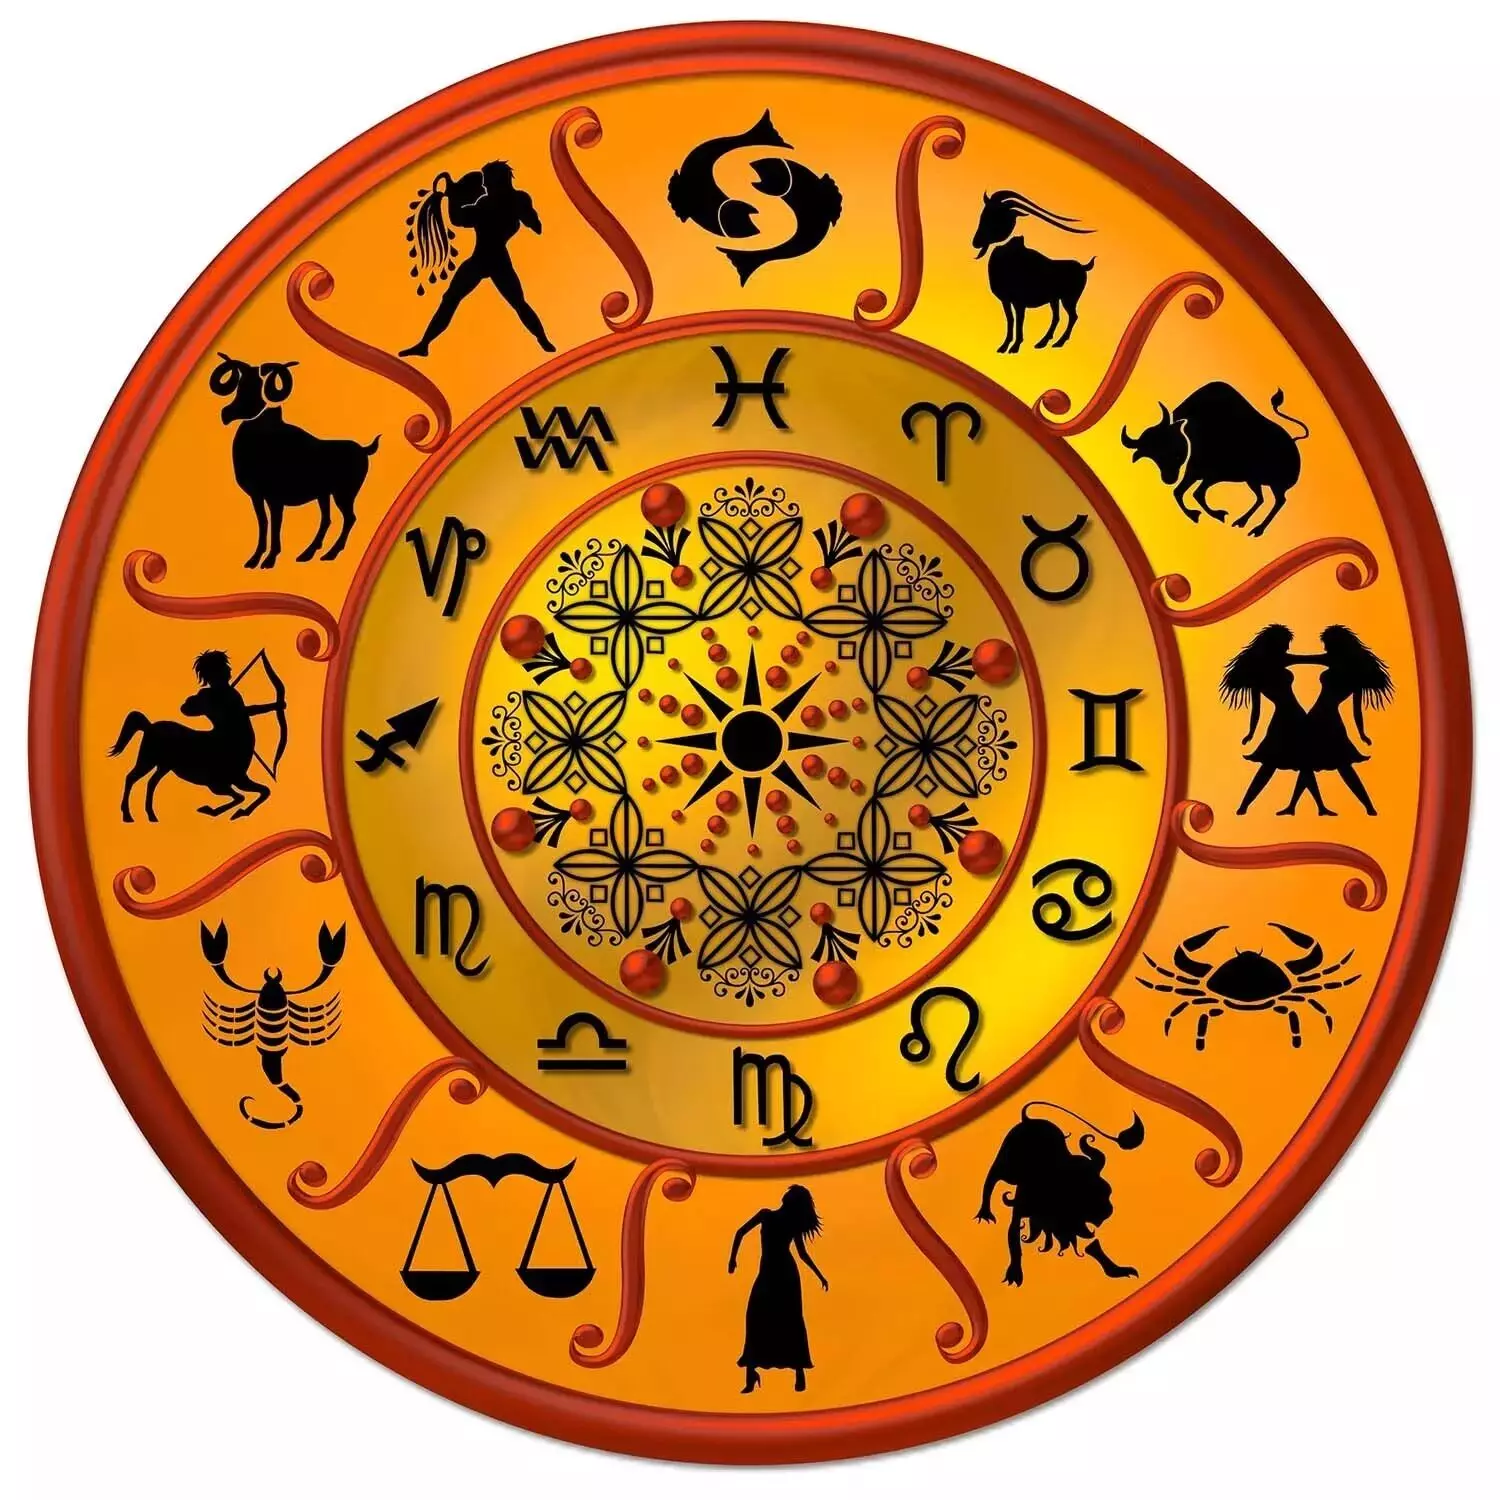 02 December   – Know your todays horoscope